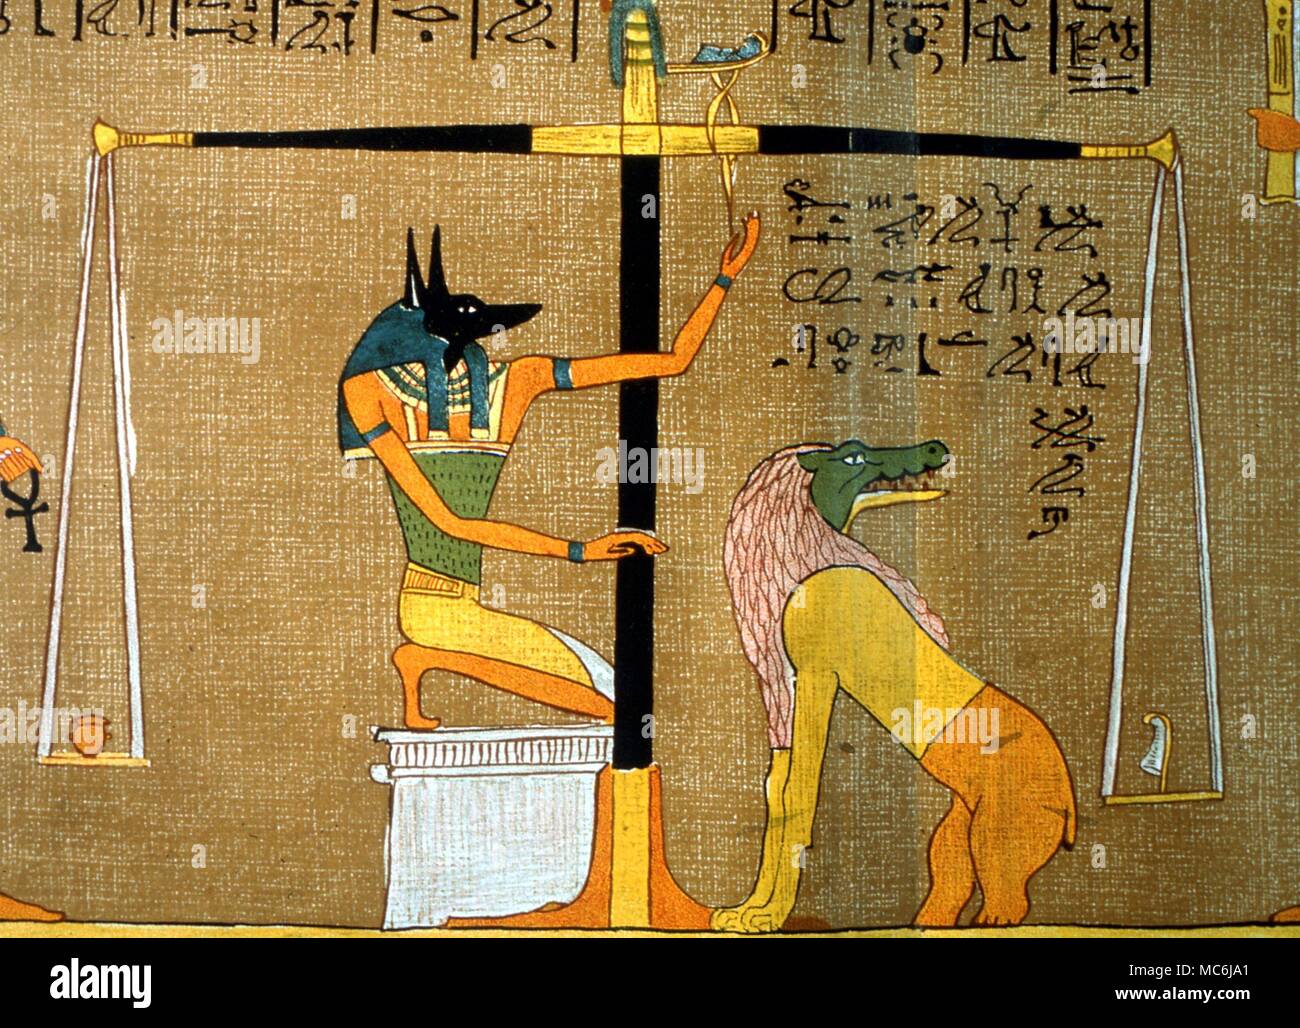 EGYPTIAN MYTH - WEIGHING OF HEART. The ritual of 'Psychostasia' the weighing of the soul of the deceased. The jackal-headed /anubis examines the balance: opposite is the monster Amemit, the Devourer. From the Hunefer papyrys. From Budge edition of Egyptian Book of the Dead, c. 1500 BC Stock Photo